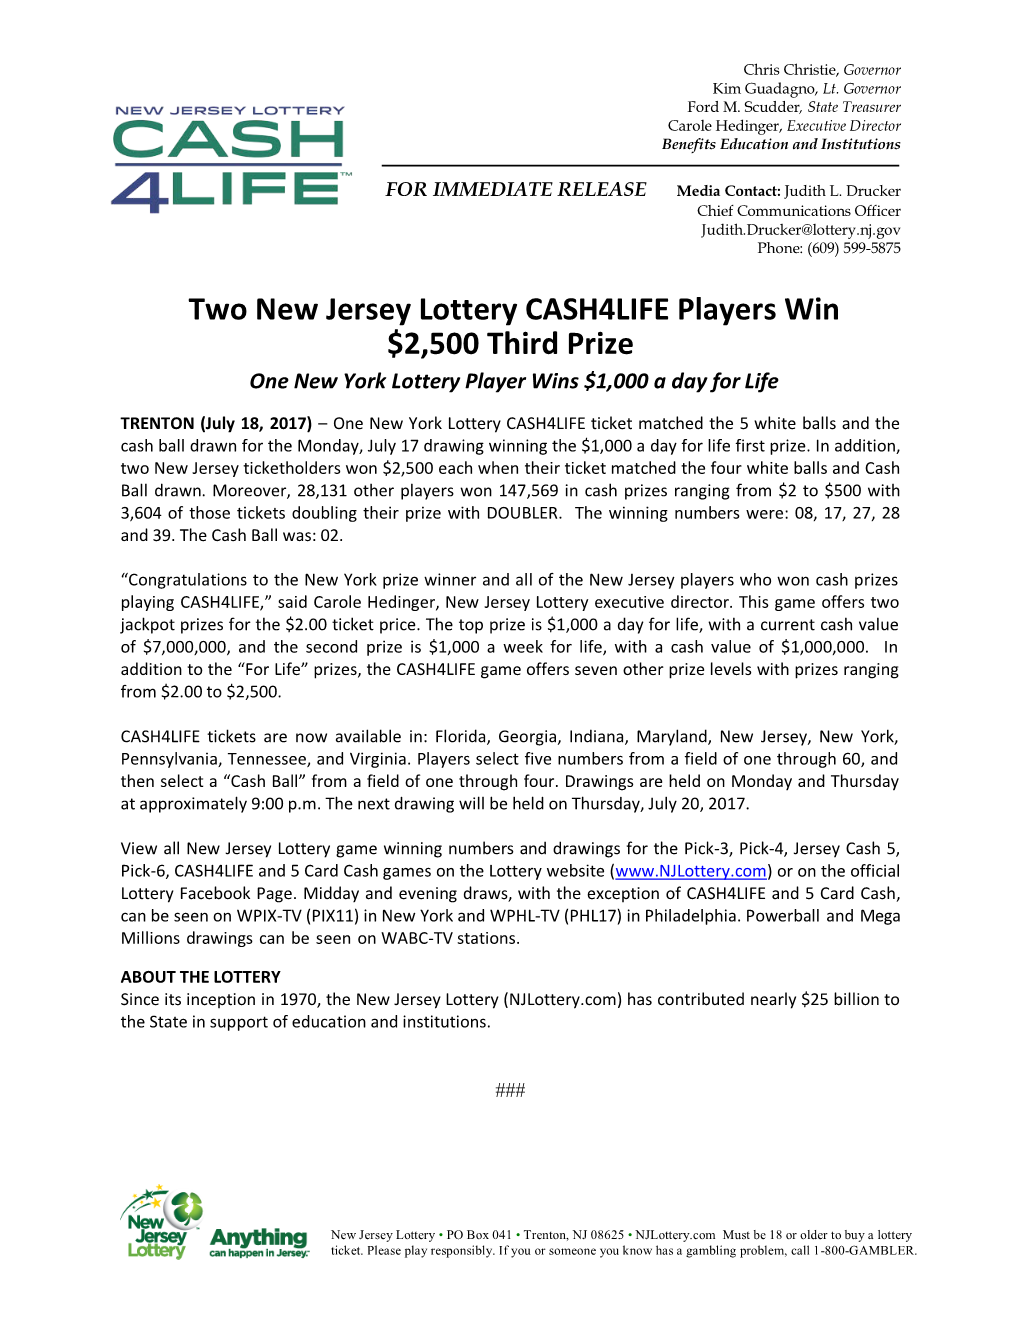 Two New Jersey Lottery CASH4LIFE Players Win $2,500 Third Prize One New York Lottery Player Wins $1,000 a Day for Life